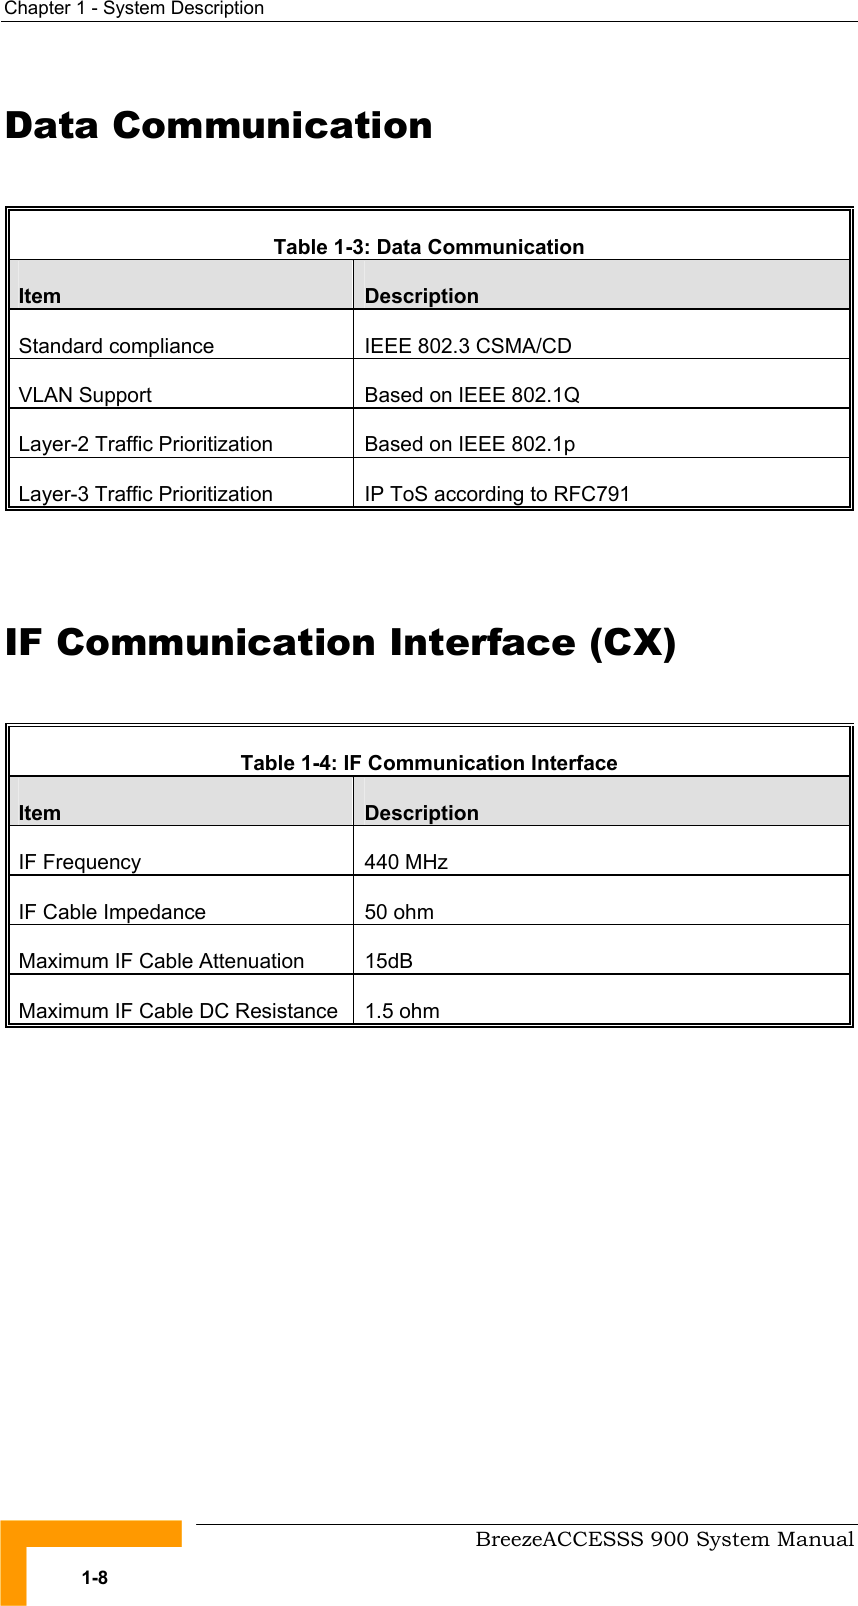 Chapter 1 - System Description   Data Communication  Table 1-3: Data Communication Item  Description Standard compliance  IEEE 802.3 CSMA/CD VLAN Support  Based on IEEE 802.1Q Layer-2 Traffic Prioritization  Based on IEEE 802.1p Layer-3 Traffic Prioritization  IP ToS according to RFC791  IF Communication Interface (CX)  Table 1-4: IF Communication Interface Item  Description IF Frequency  440 MHz IF Cable Impedance  50 ohm Maximum IF Cable Attenuation   15dB Maximum IF Cable DC Resistance  1.5 ohm   BreezeACCESSS 900 System Manual 1-8 